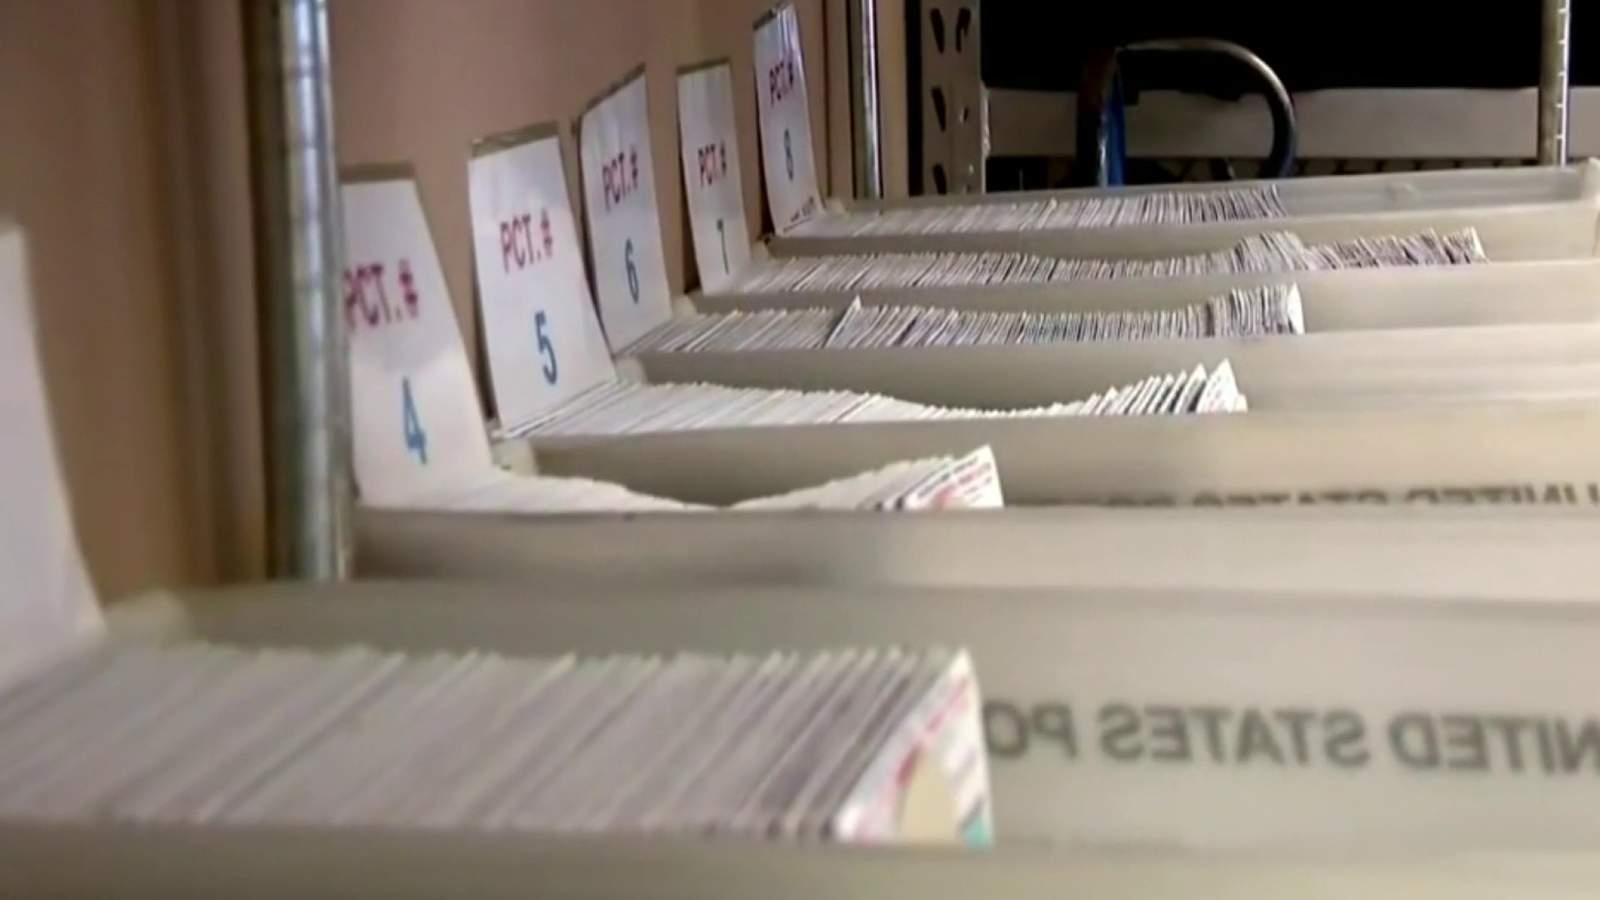 Detroit primary election irregularities may lead to state stepping in